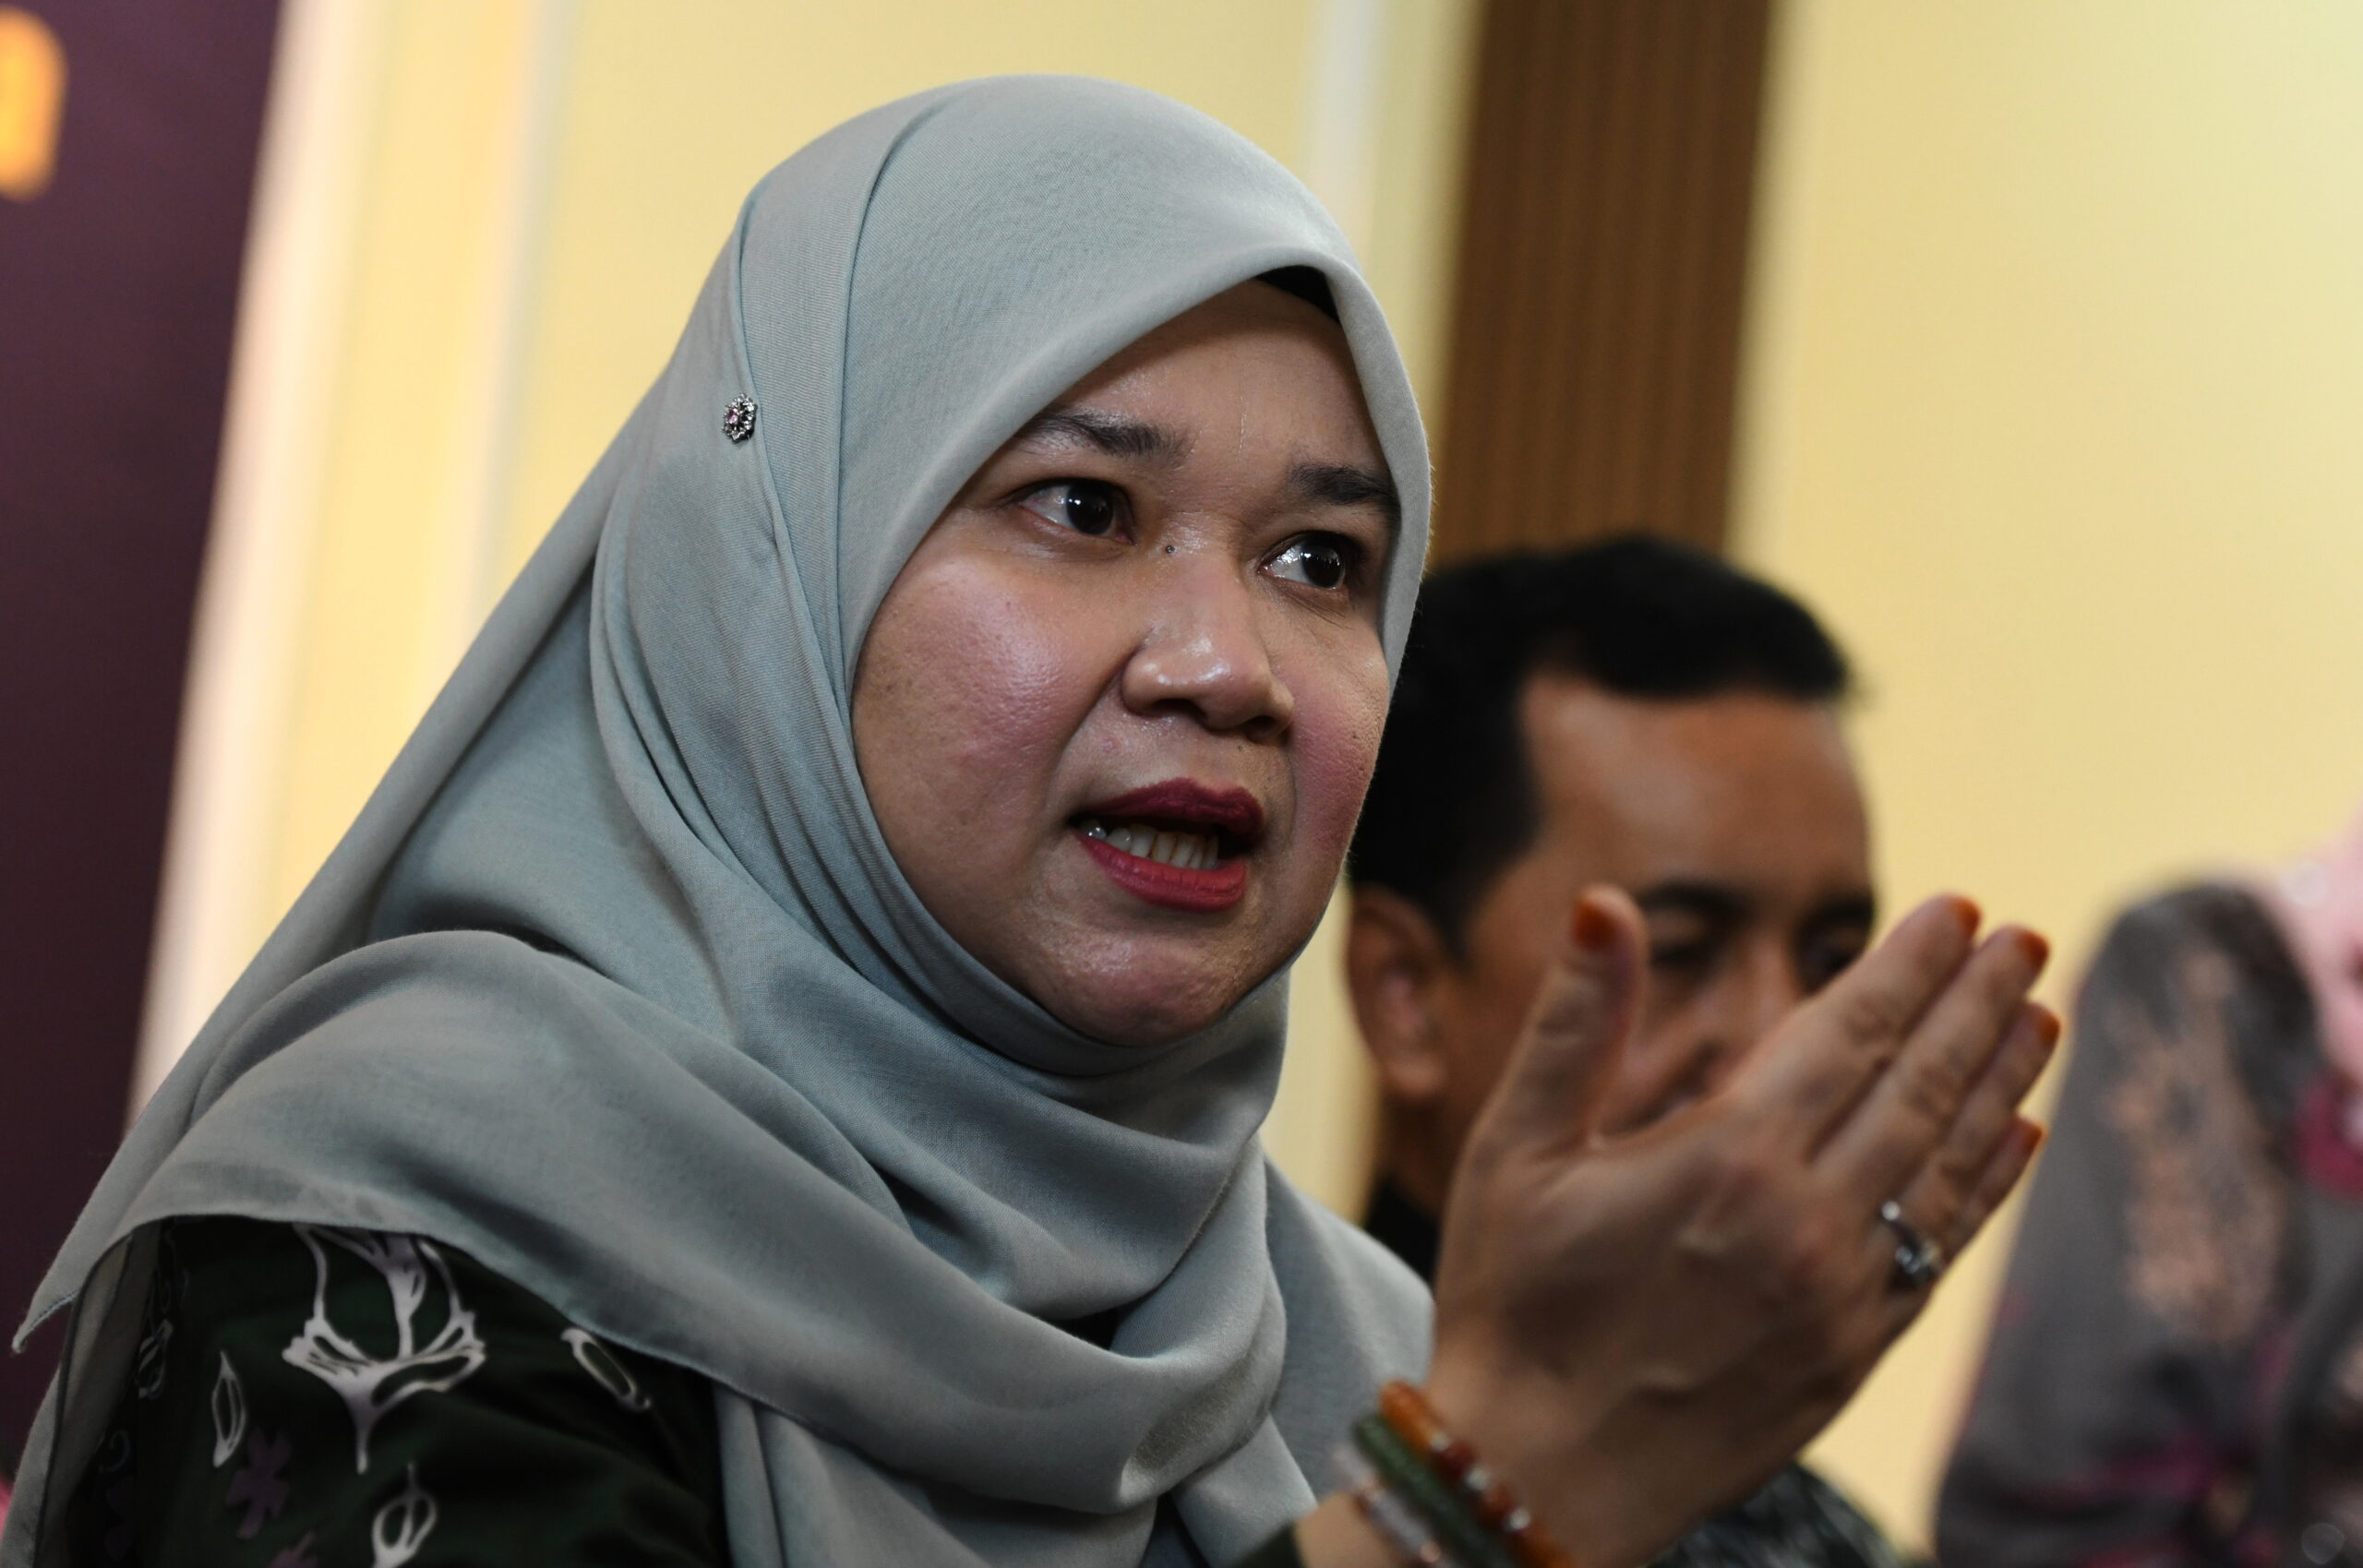 No schools are exempt from DLP directives: Fadhlina